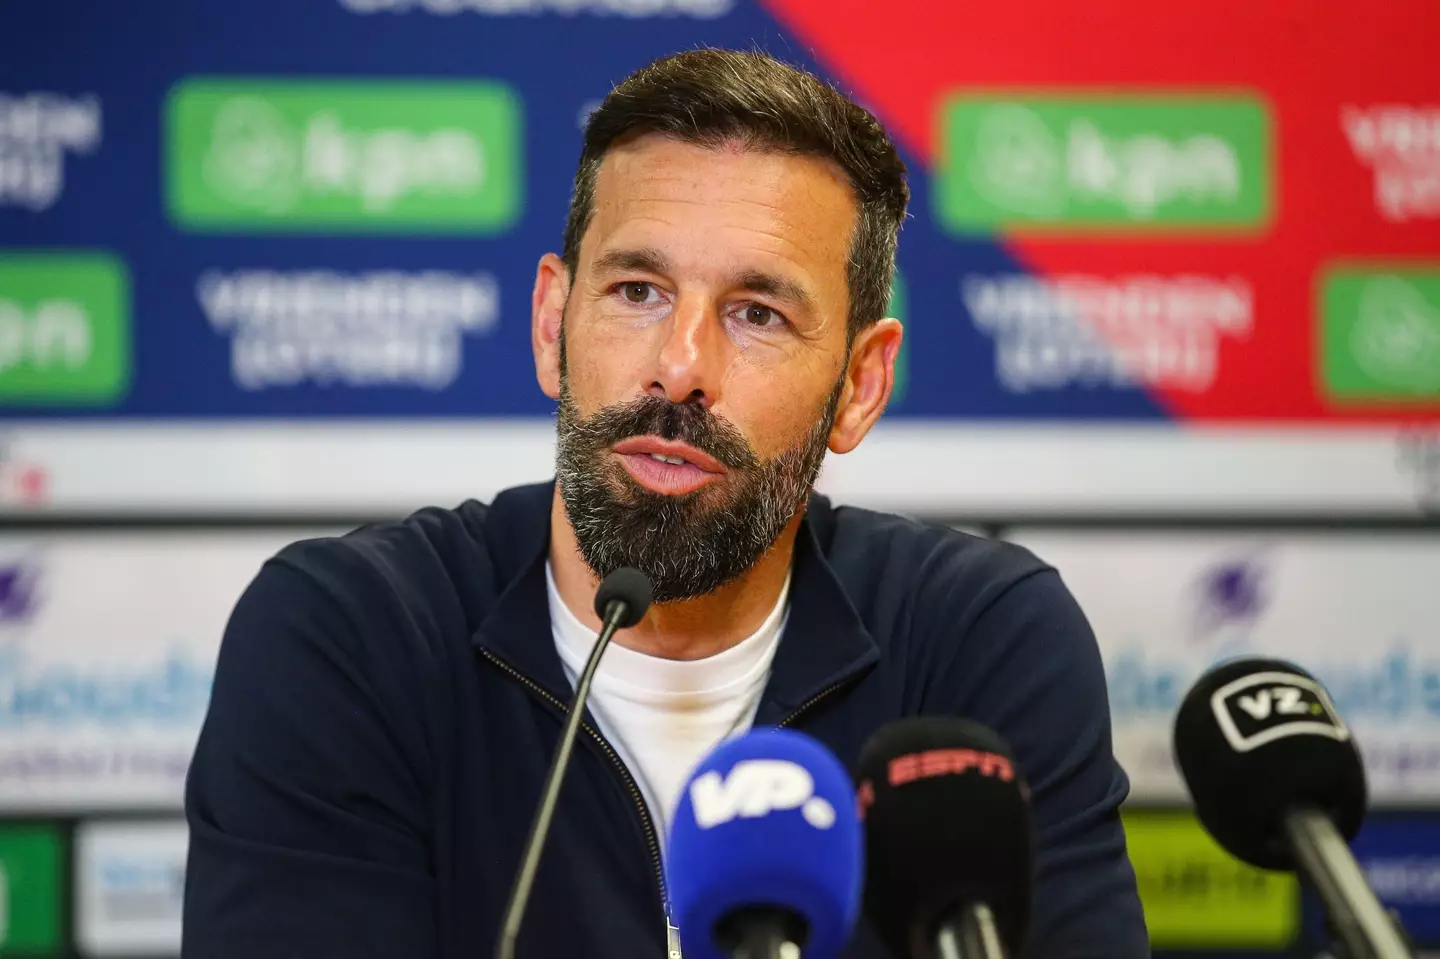 Van Nistelrooy has left with immediate effect. Image: Alamy